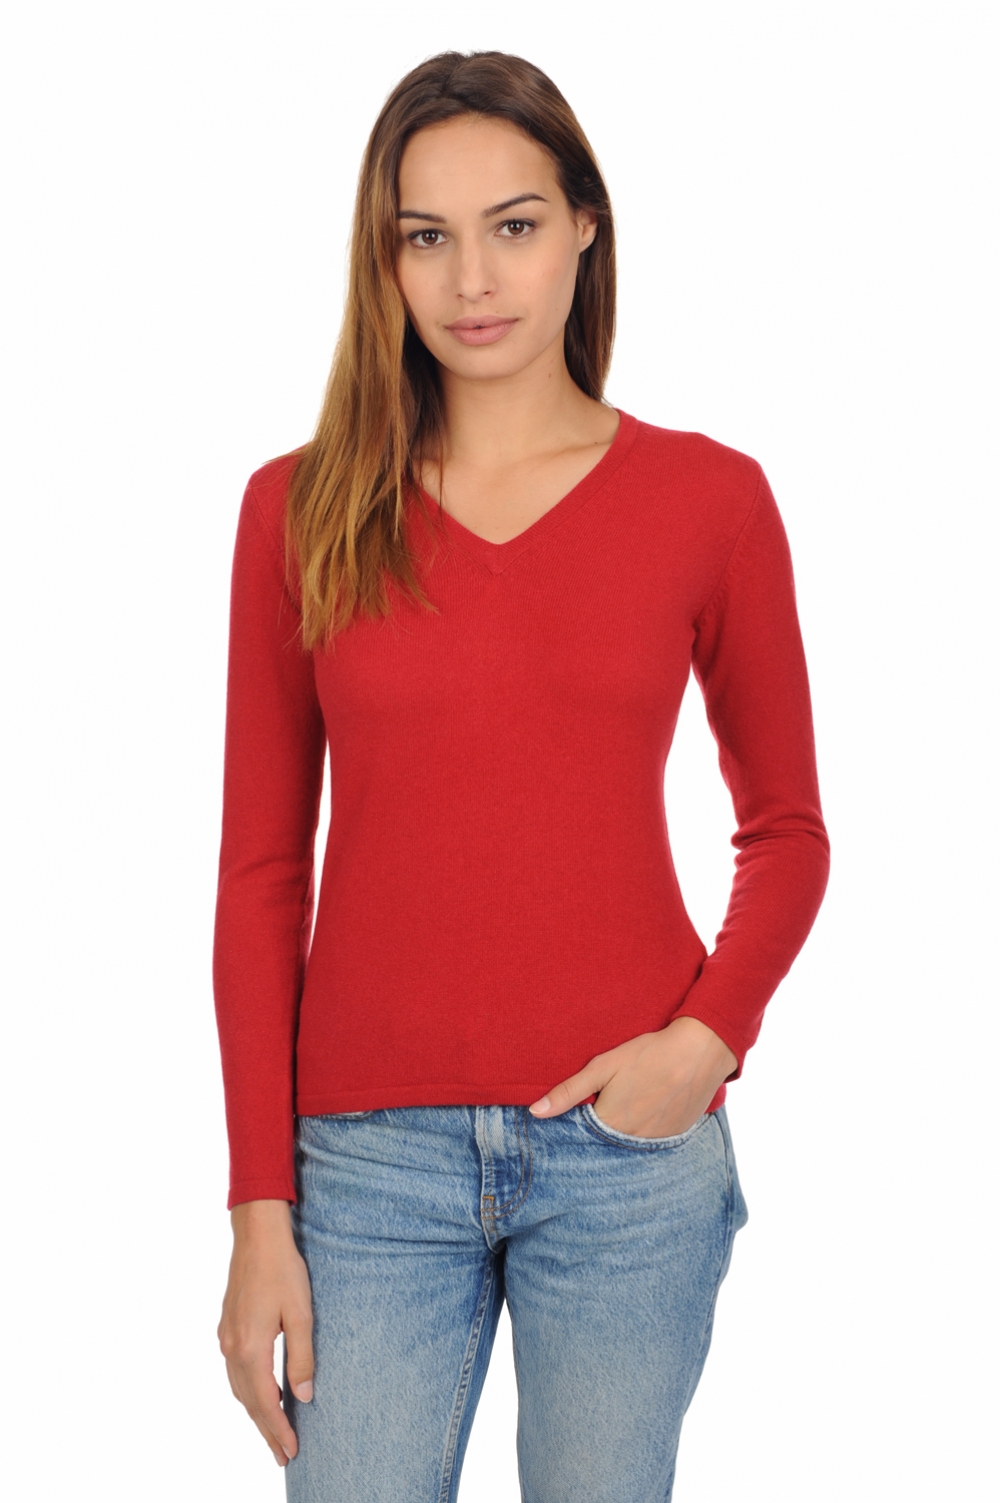 Cashmere ladies spring summer collection emma blood red 4xl